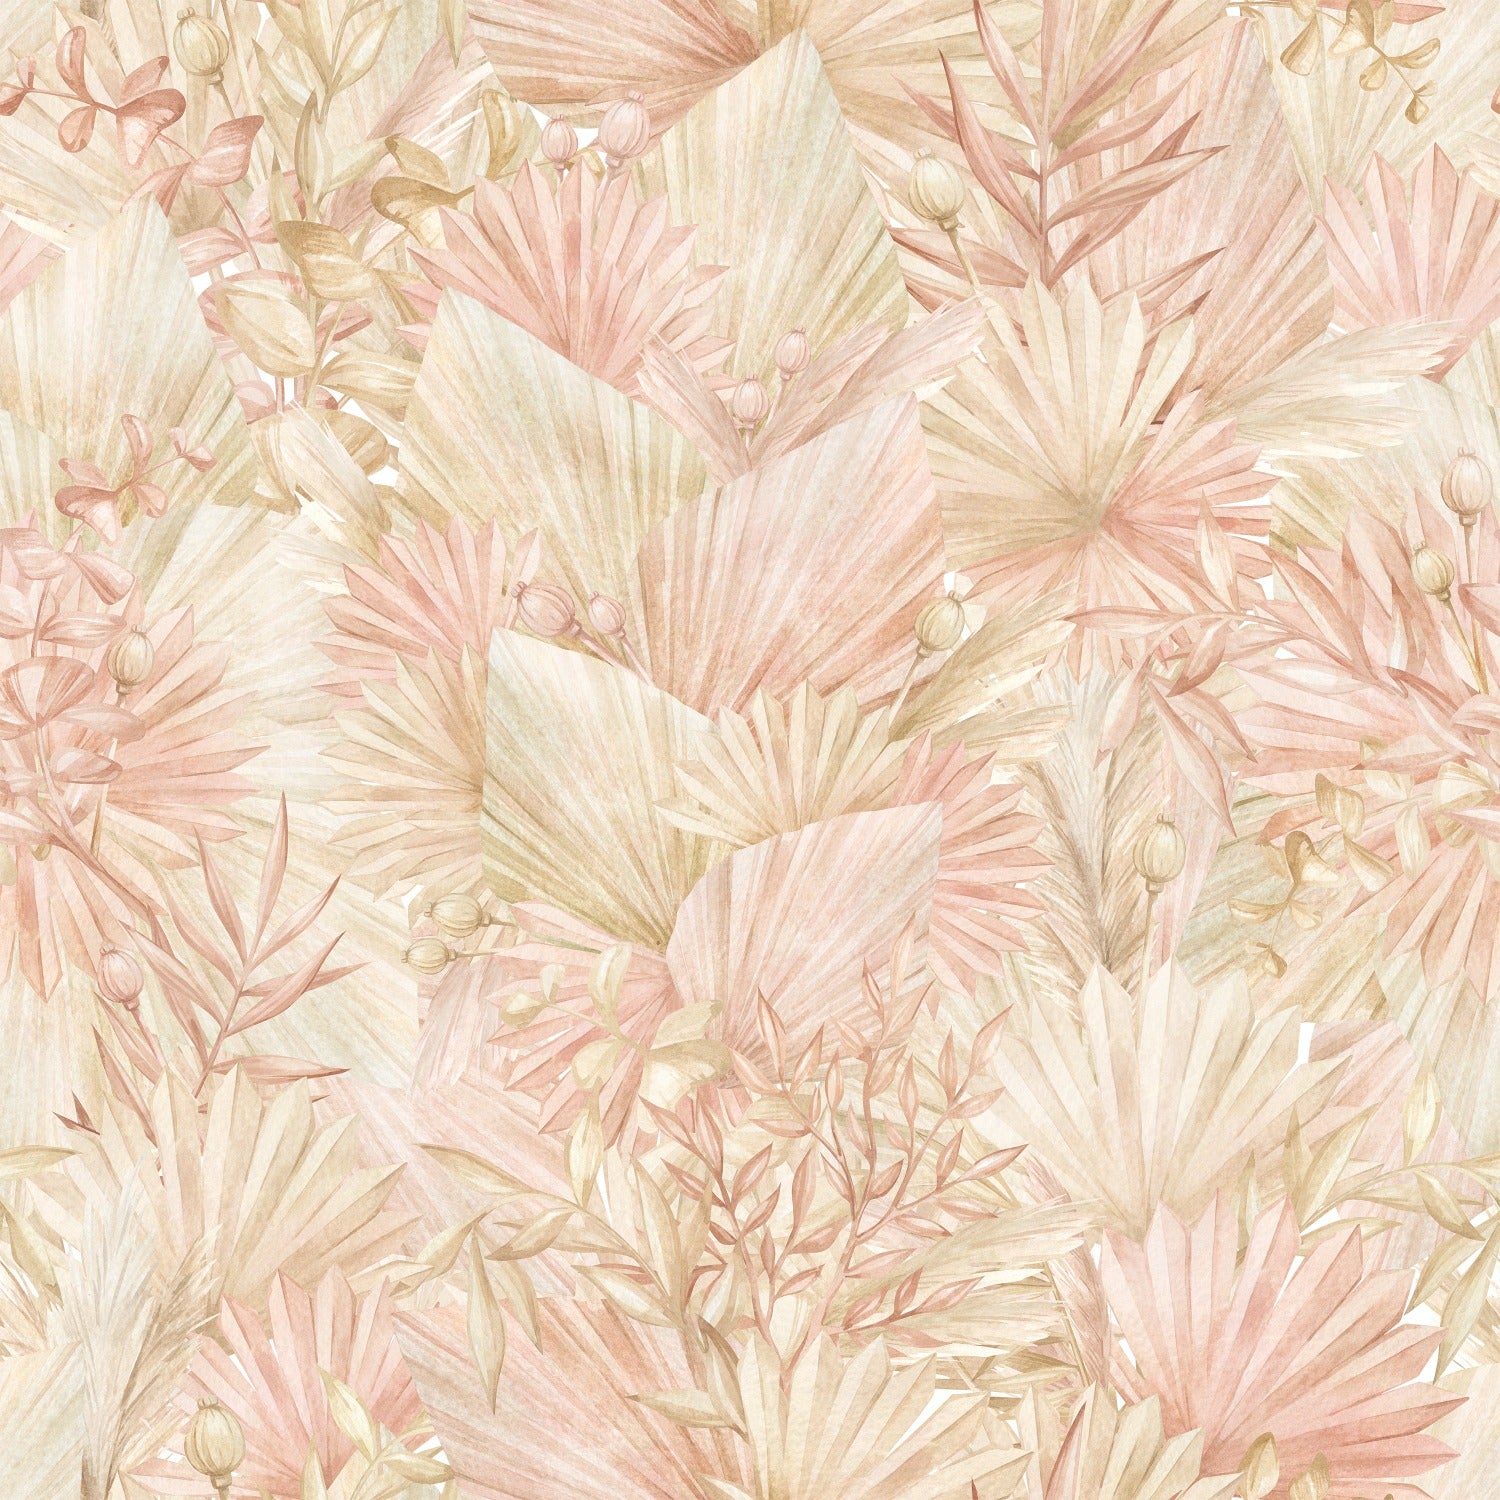 A close-up view of the Floral Tropical Wallpaper, displaying an intricate design of tropical leaves and plants in soft pastel shades of pink, beige, and green. The hand-painted style adds a delicate and artistic touch.